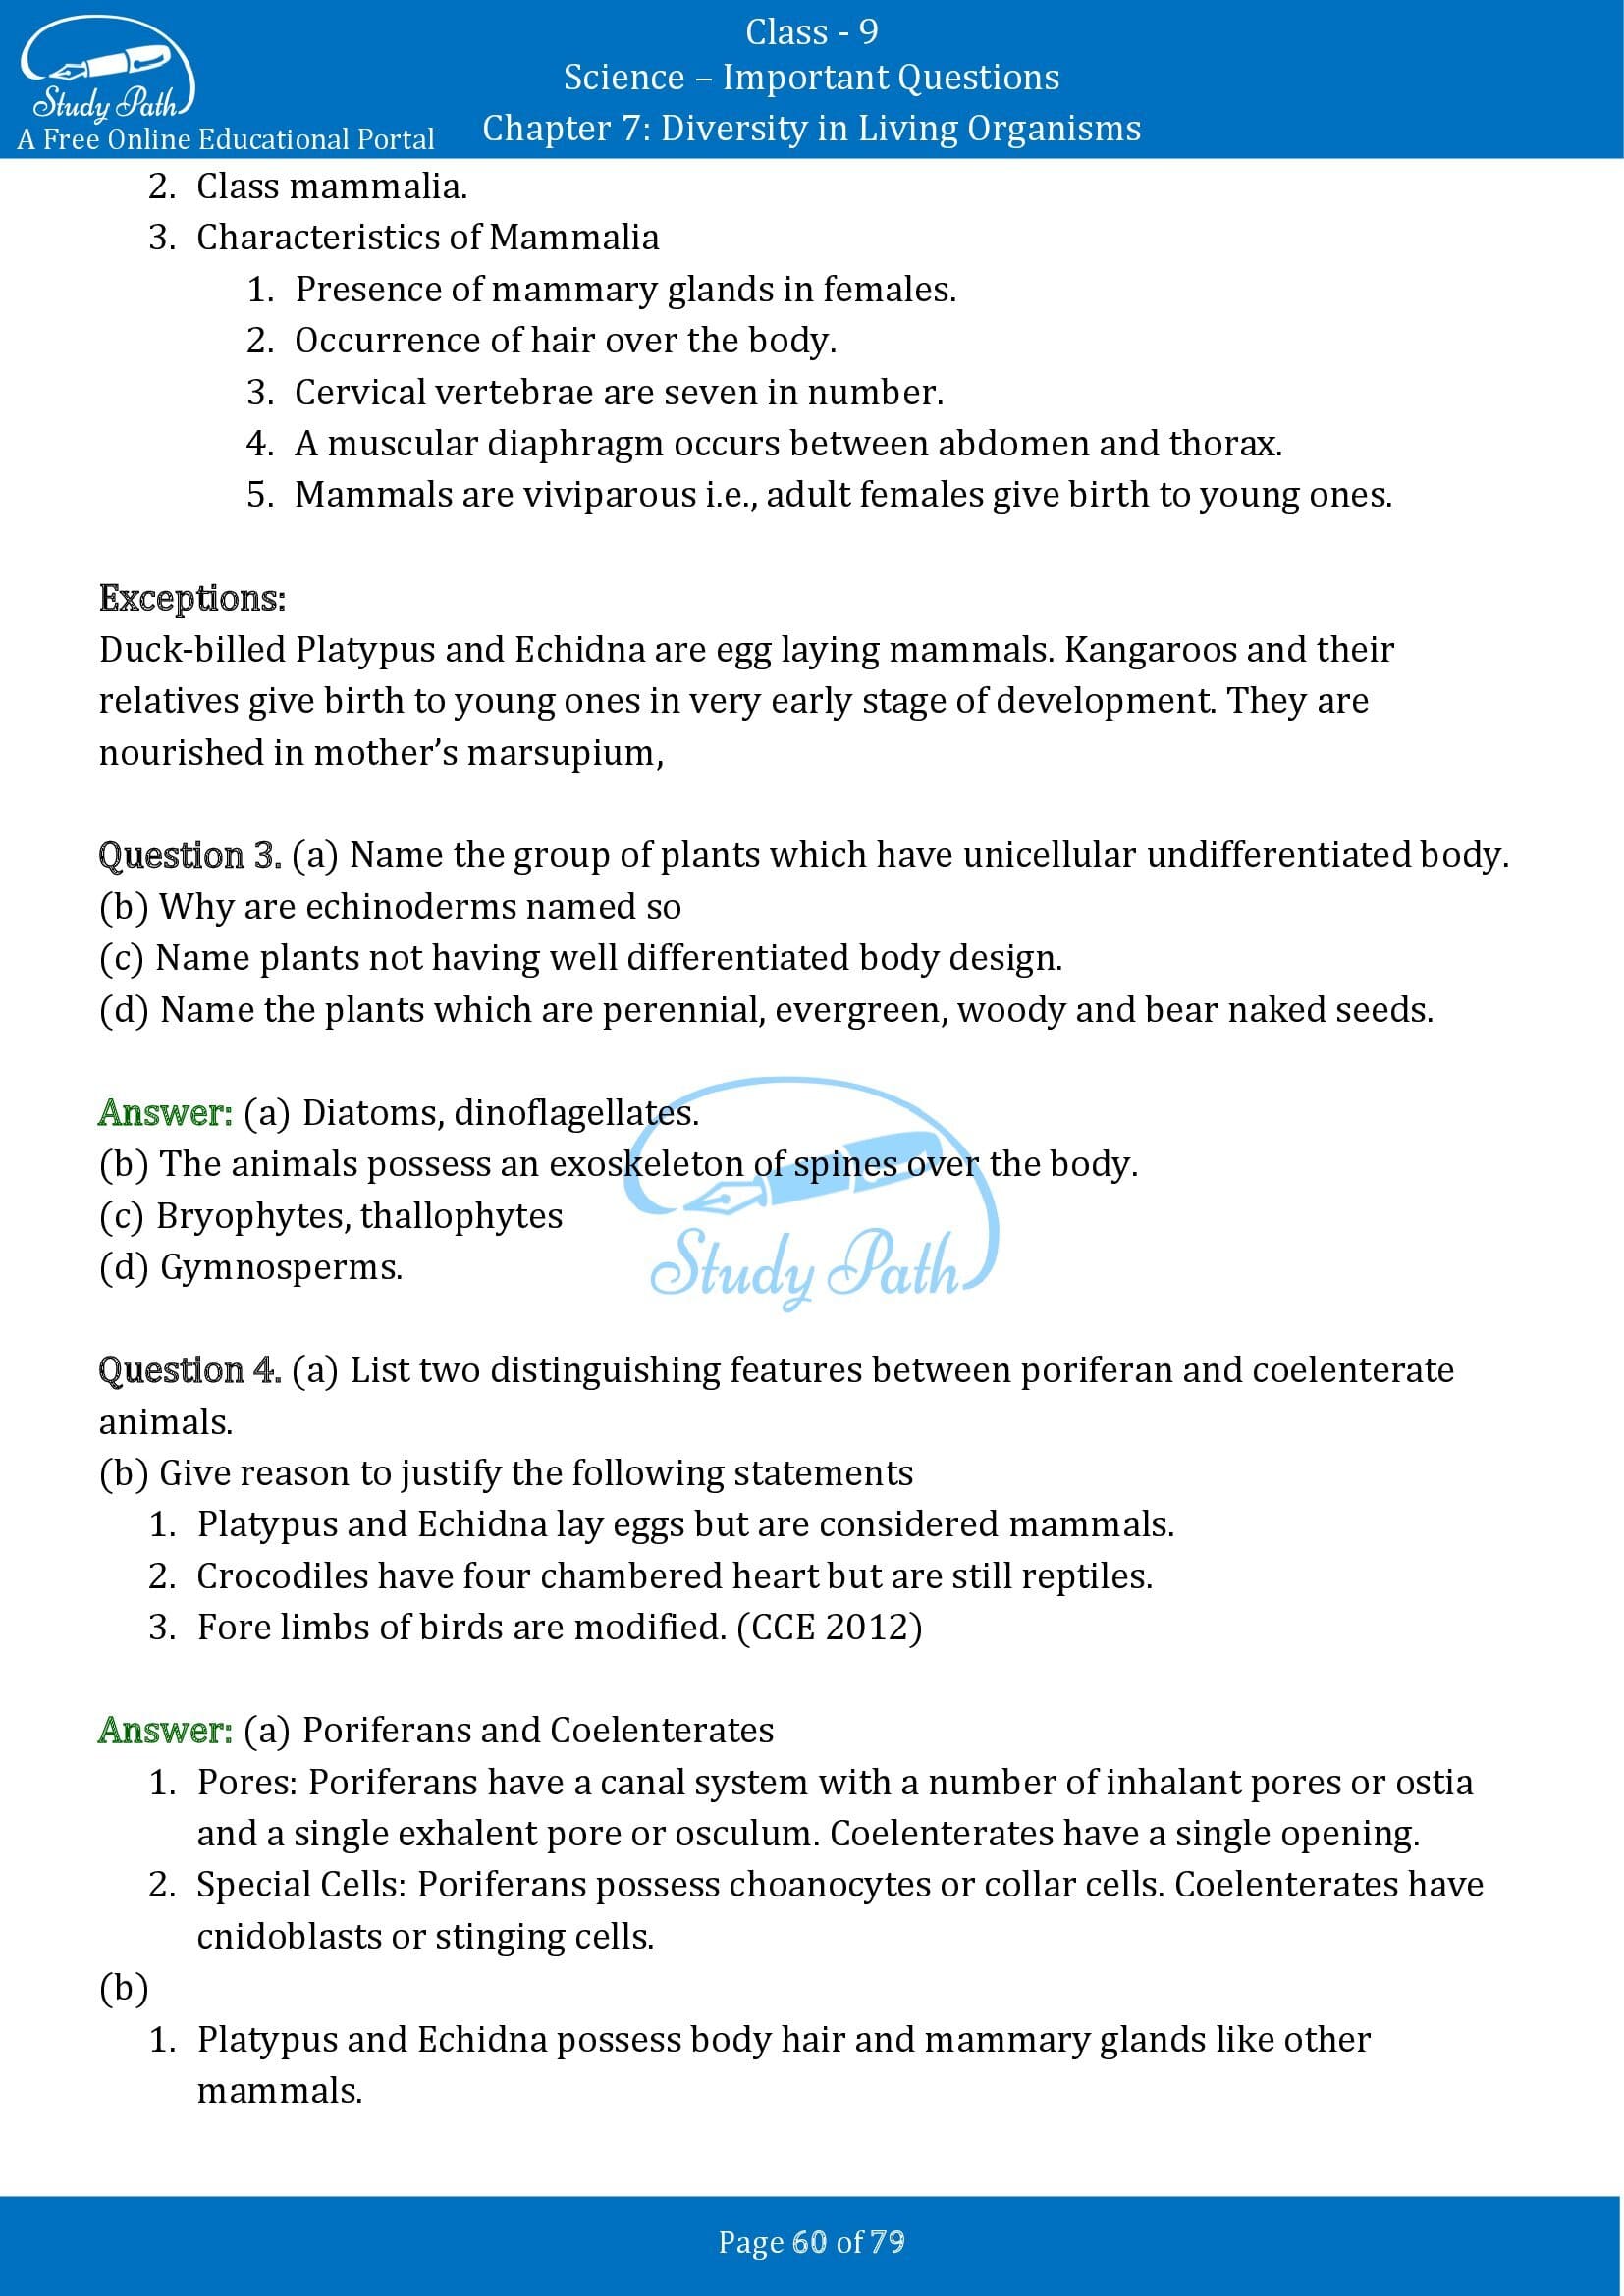 Important Questions for Class 9 Science Chapter 7 Diversity in Living Organisms 00060